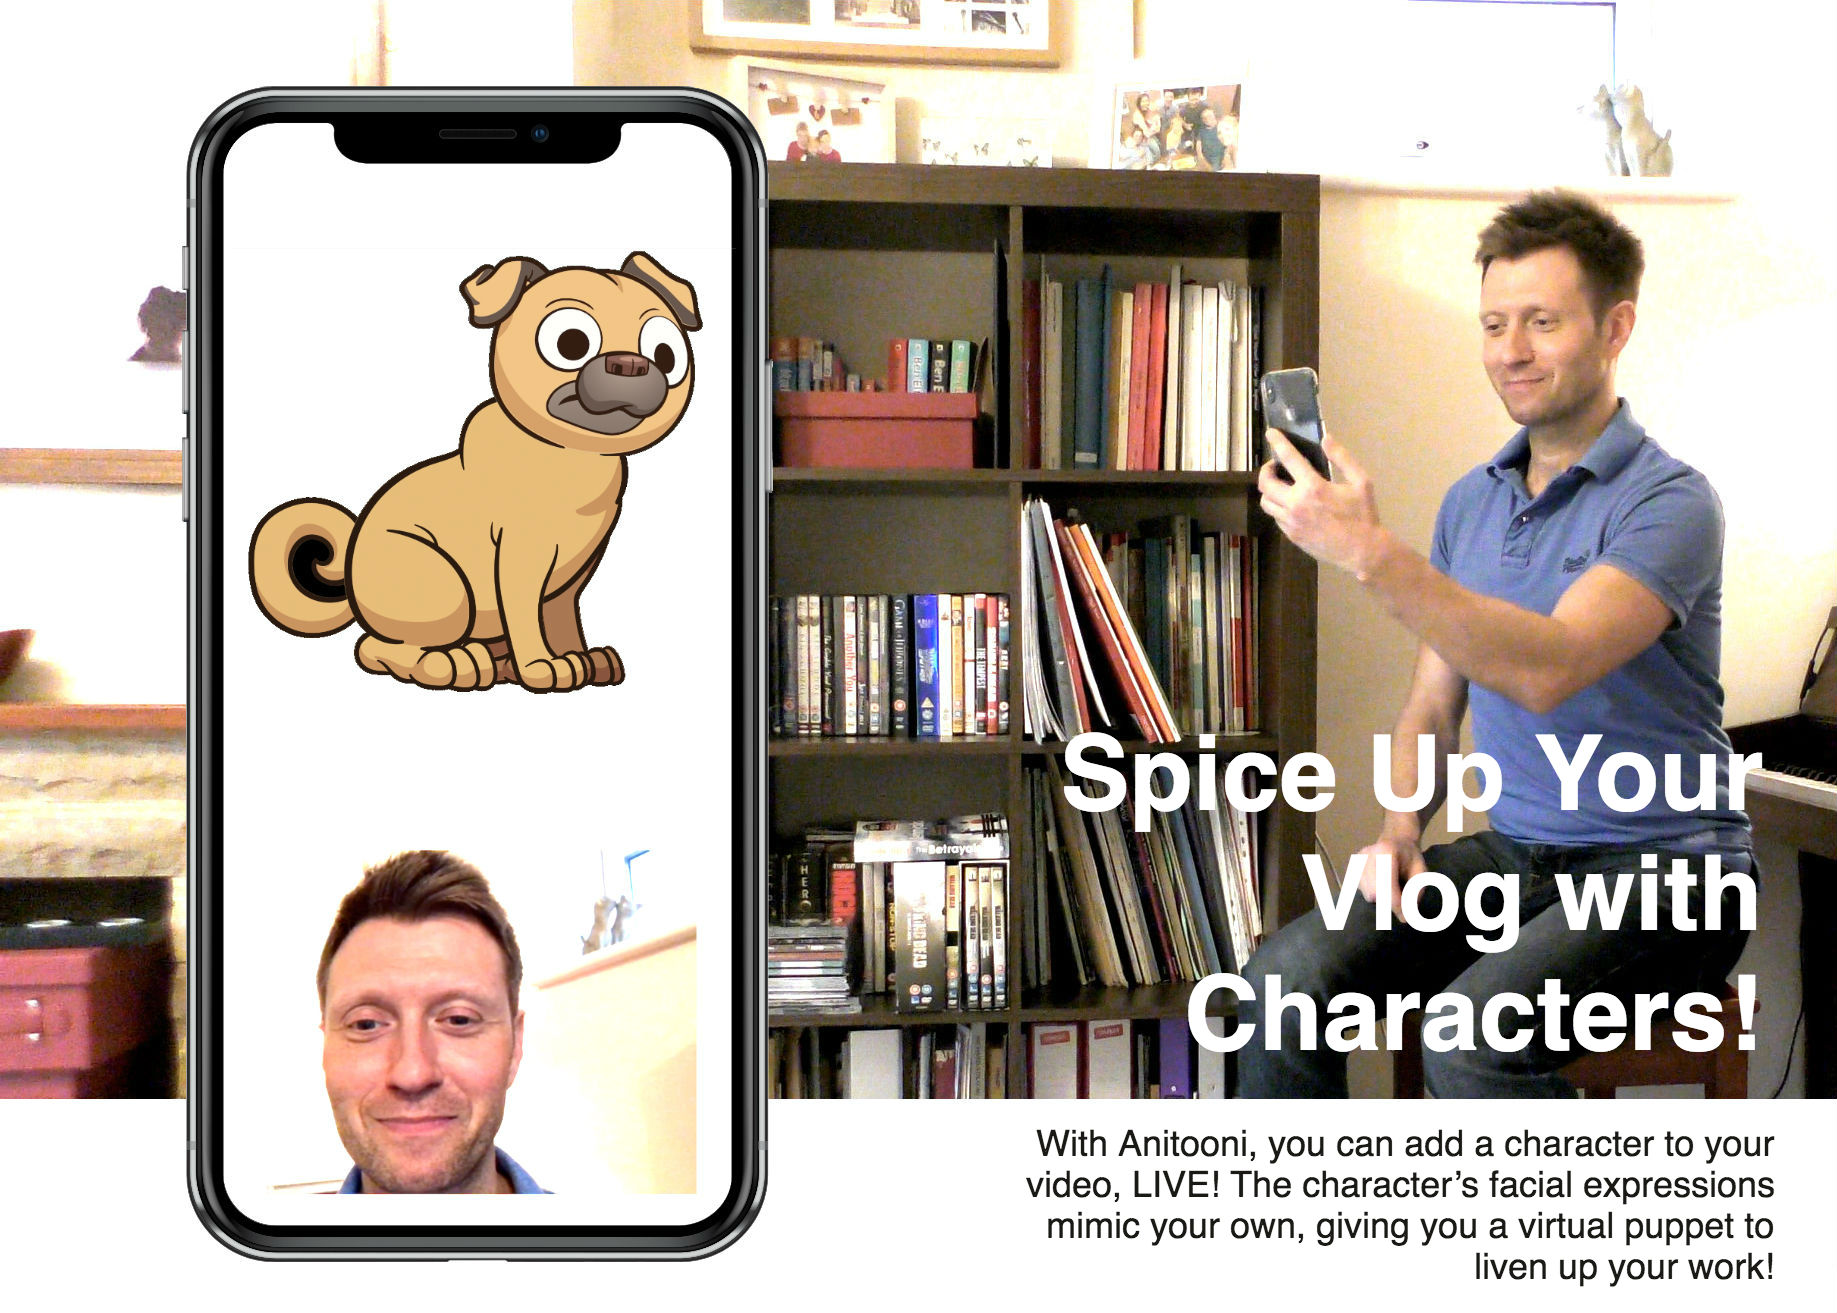 Anitooni - Spice up your Vlog with Characters!